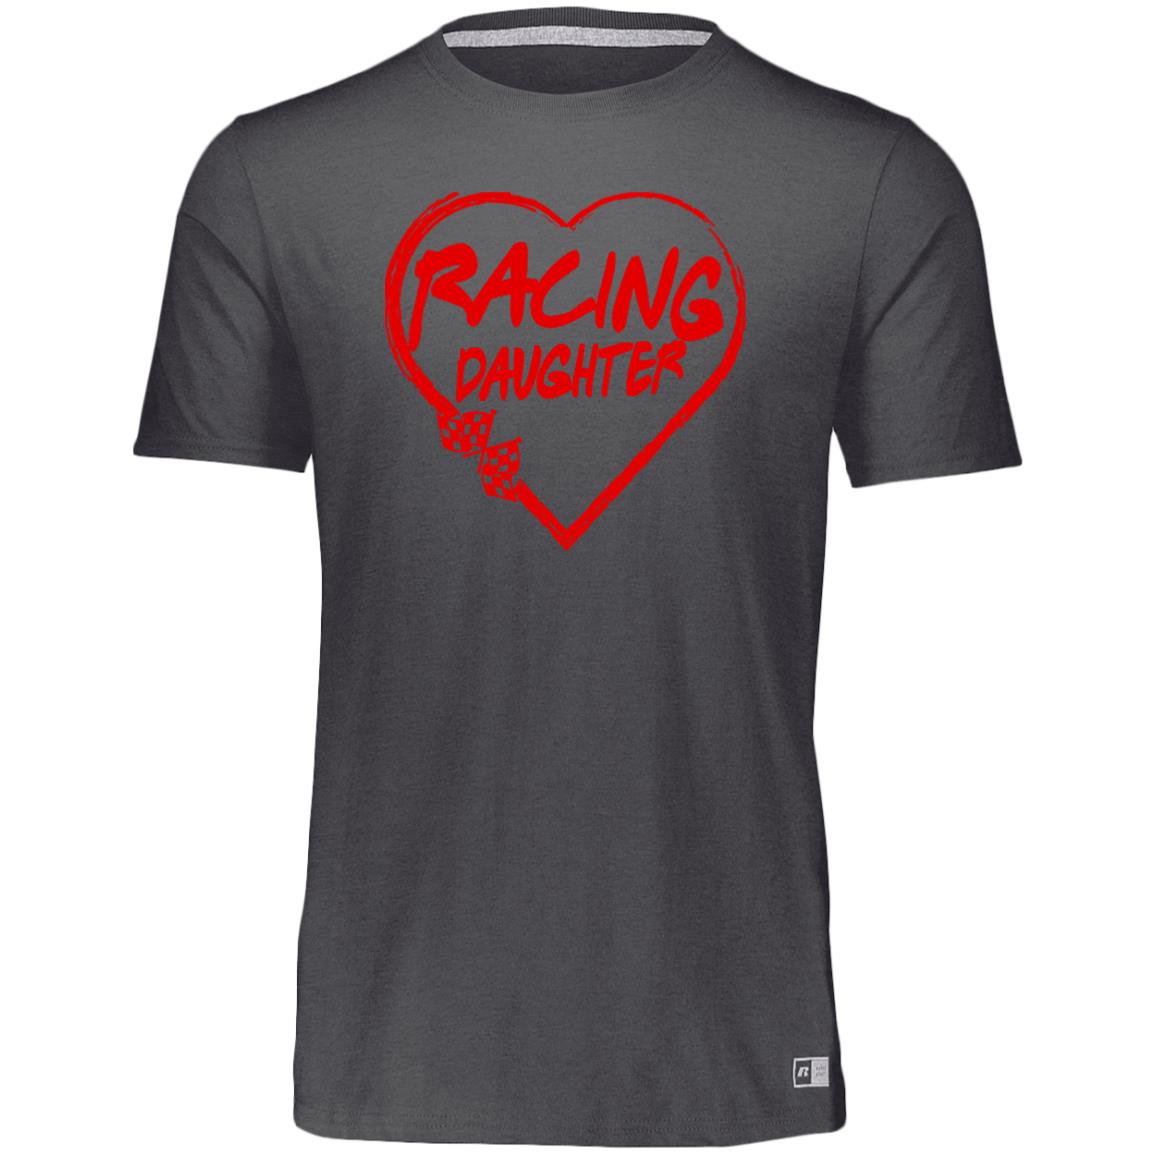 Racing Daughter Heart Youth Essential Dri-Power Tee